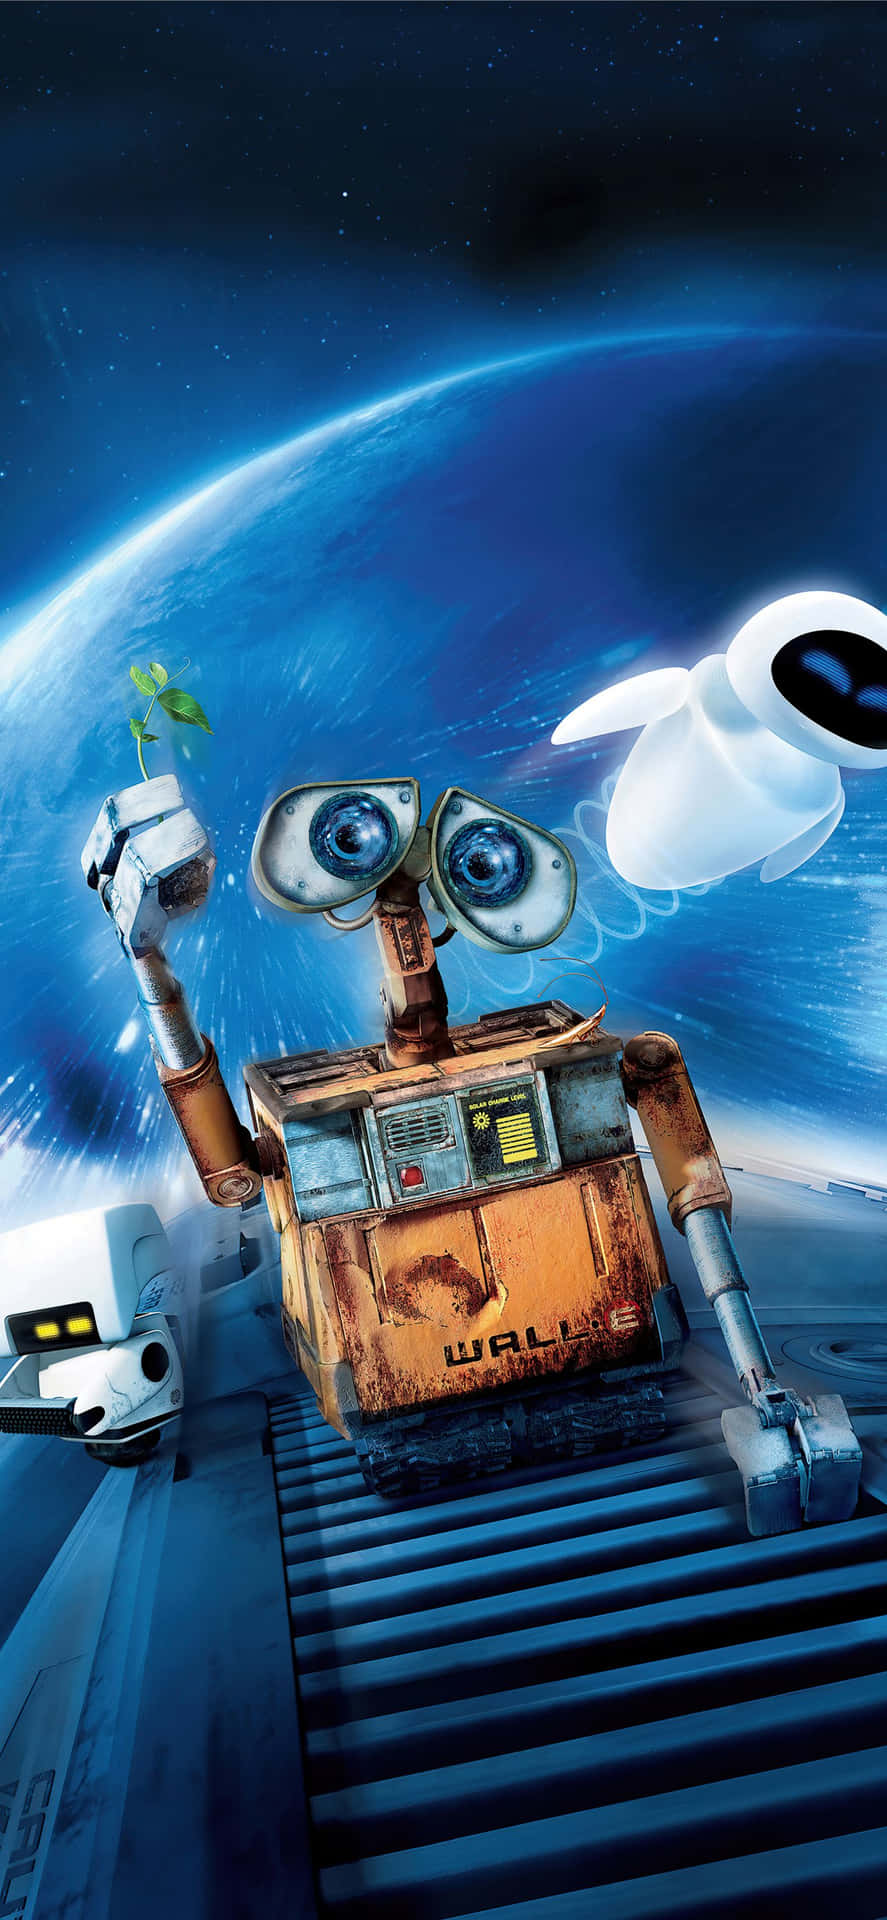 On Spaceship Eve And Wall E Iphone Wallpaper